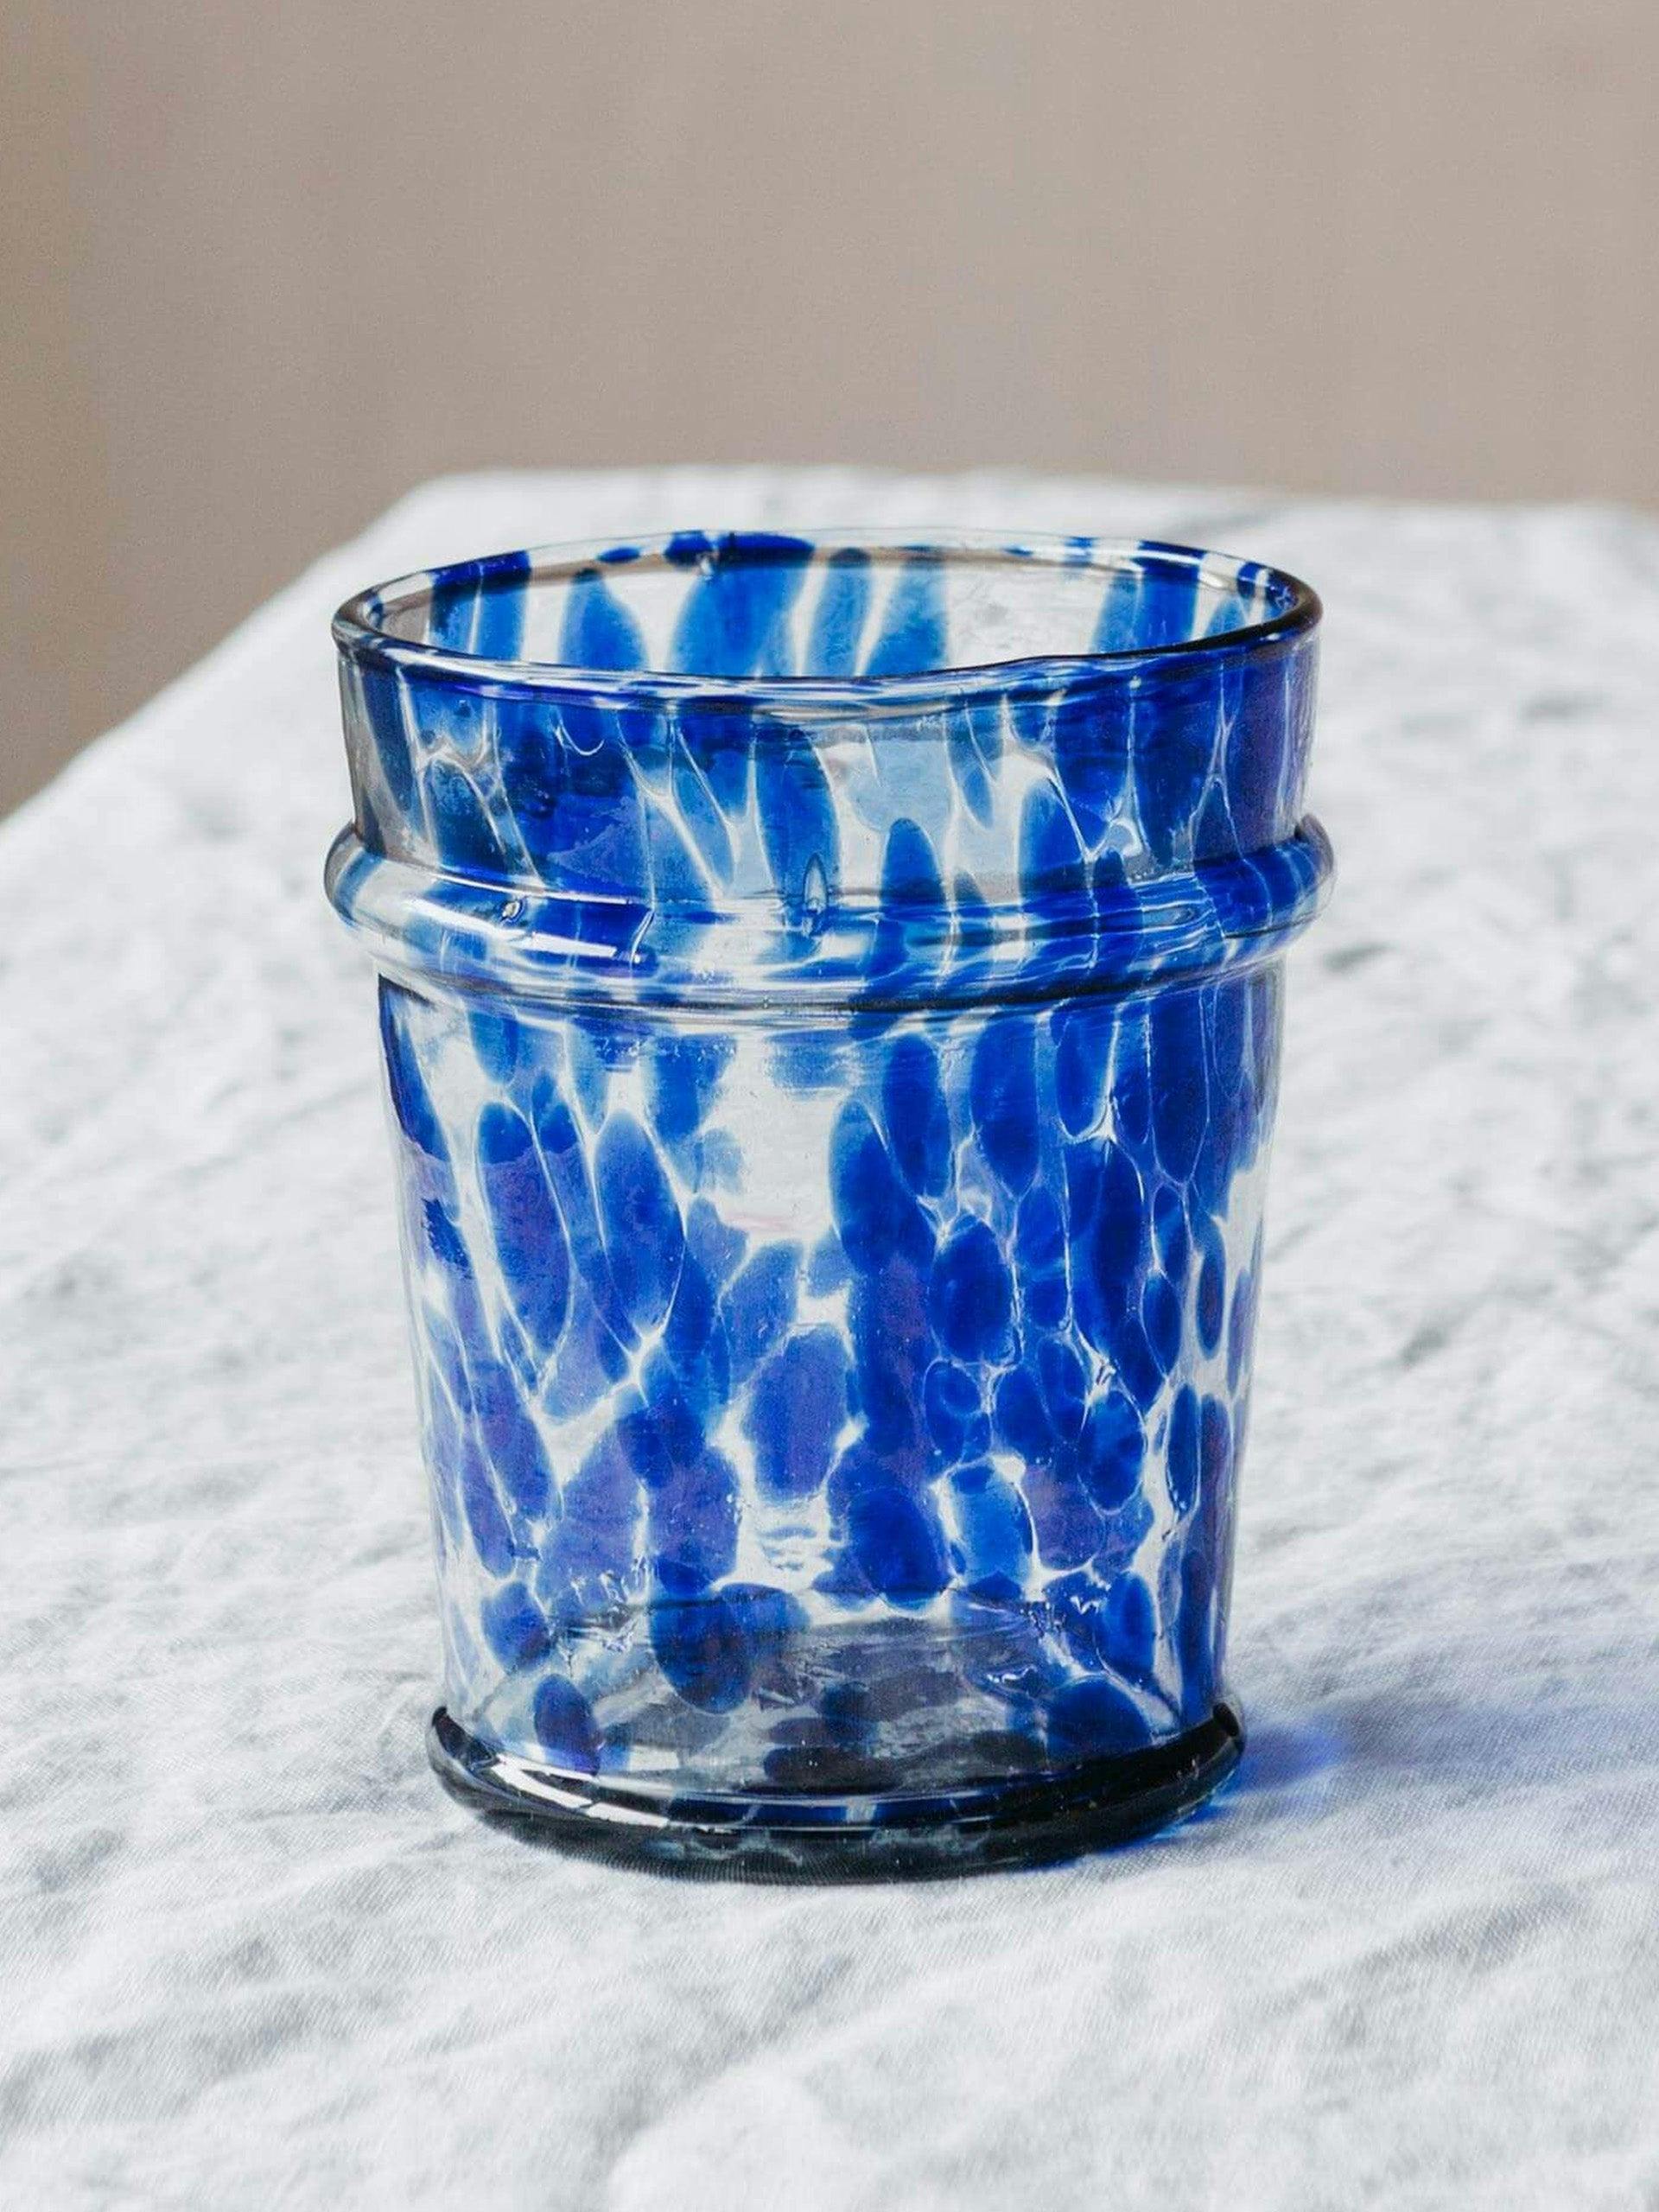 Blue speckled glass